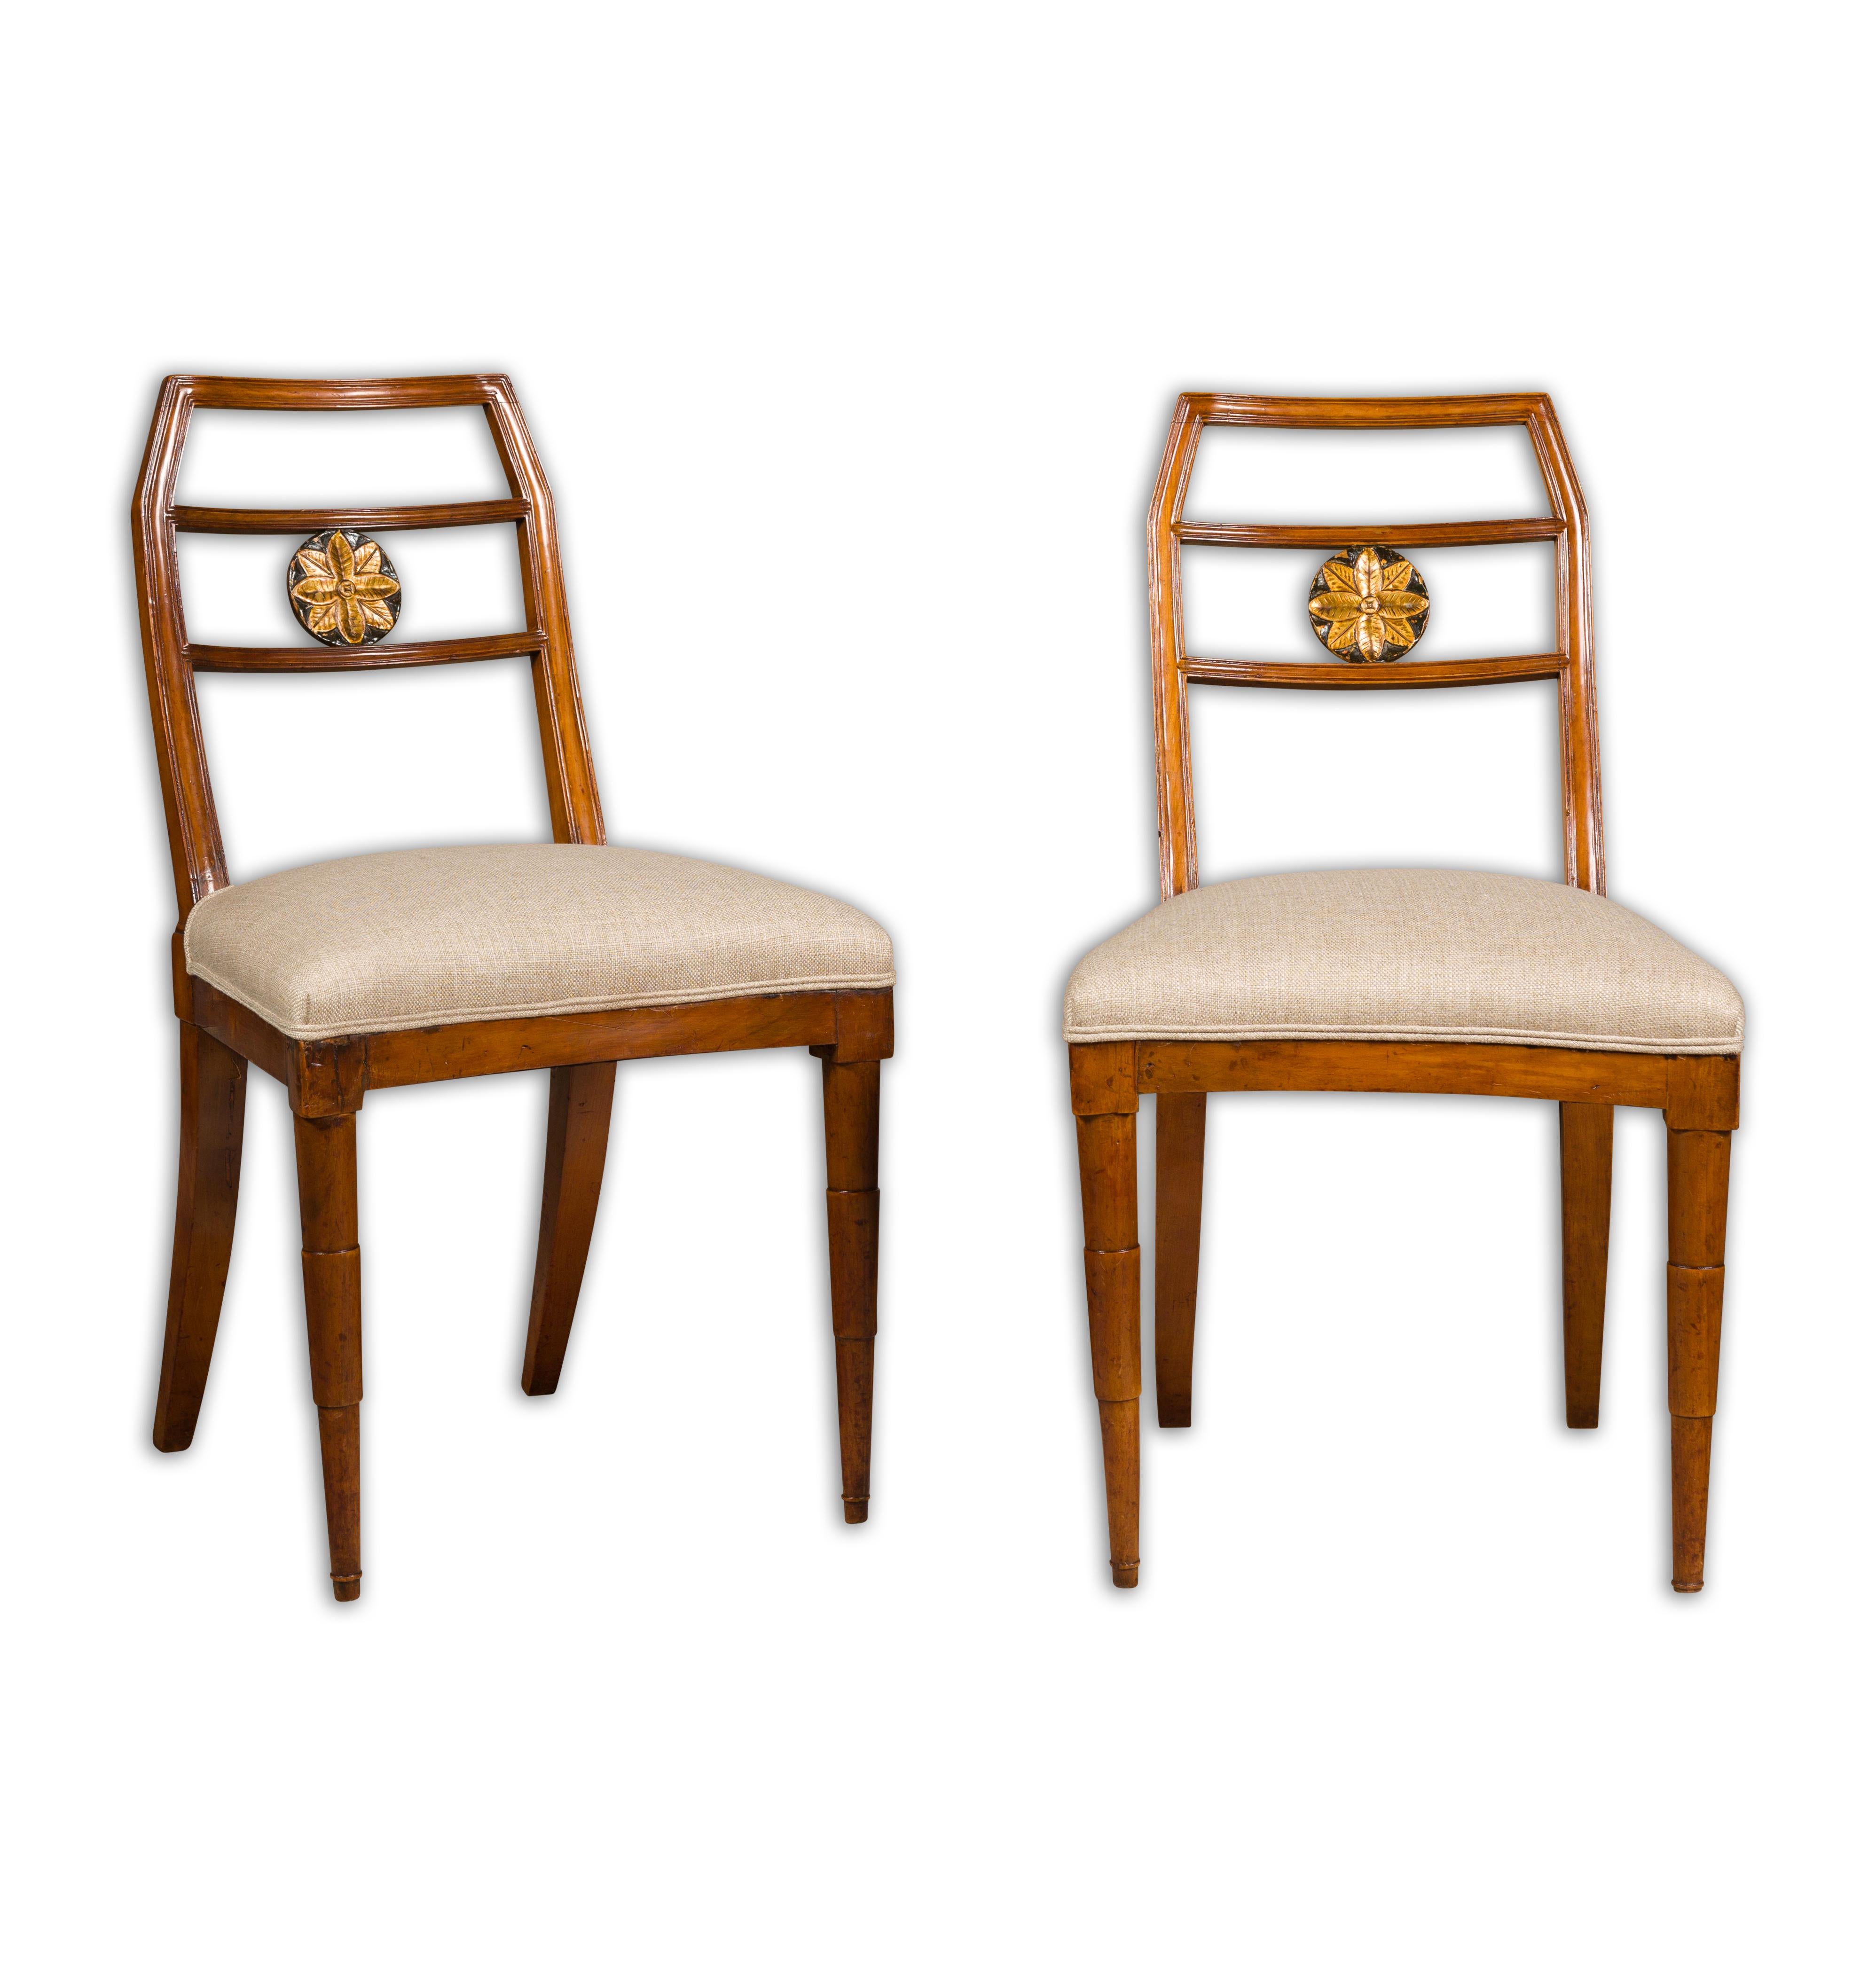 Italian 1800s Walnut Side Chairs with Carved and Gilt Floral Medallions, a Pair For Sale 12